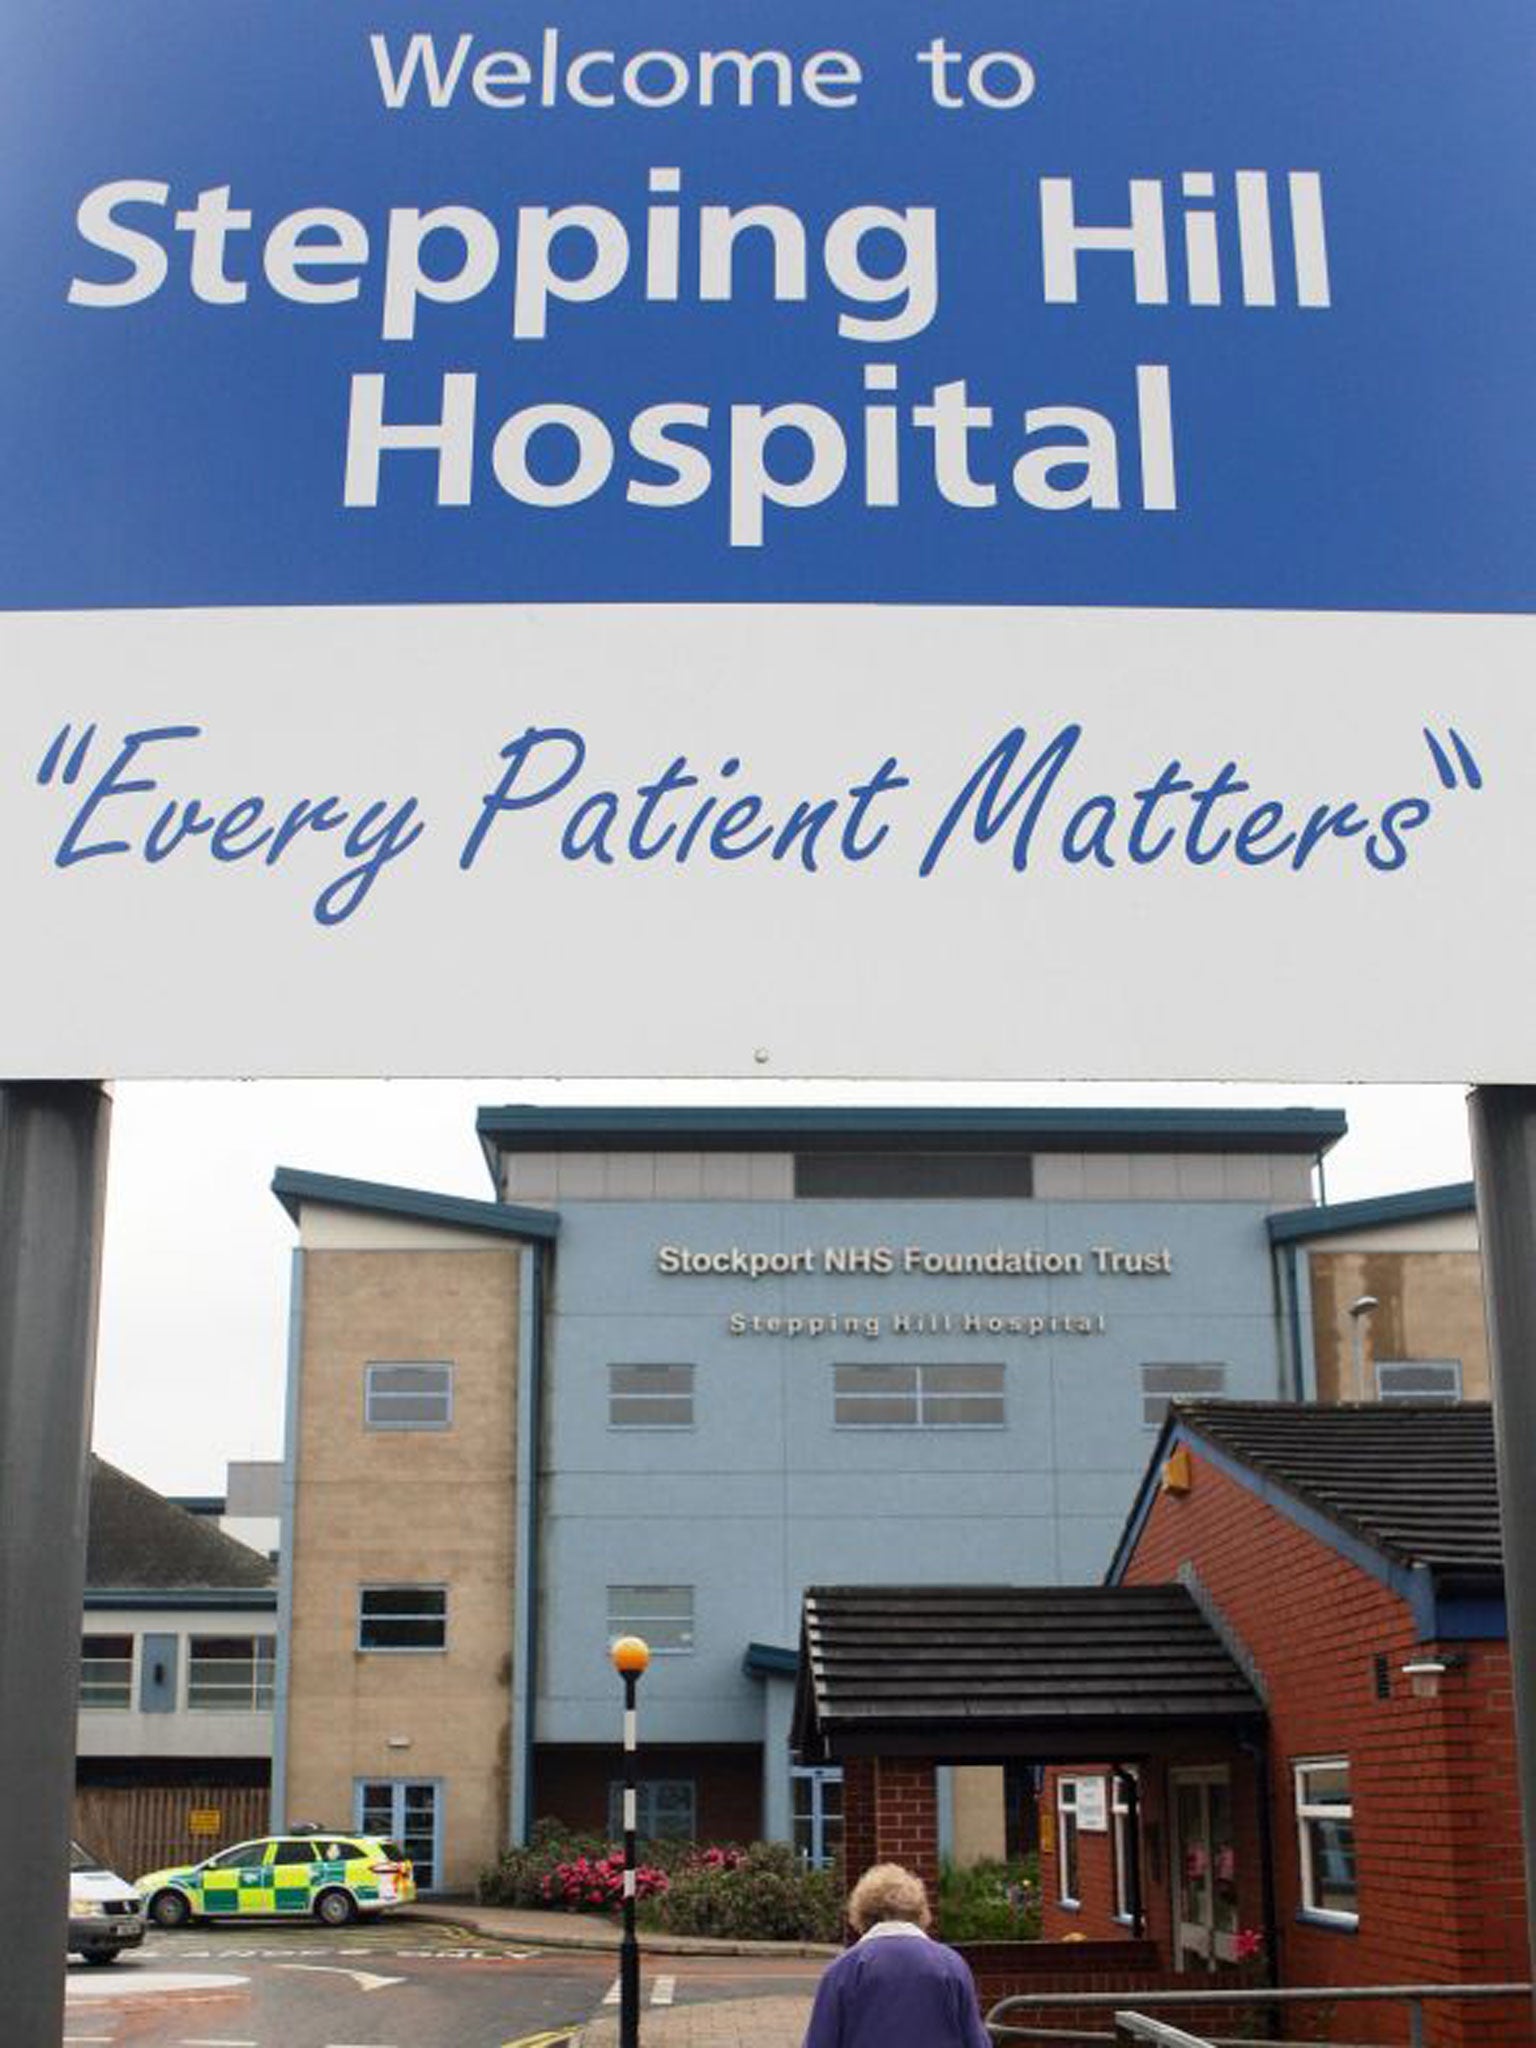 Victorino Chua, 48, was held last year on suspicion of tampering with medical records at Stepping Hill Hospital in Stockport